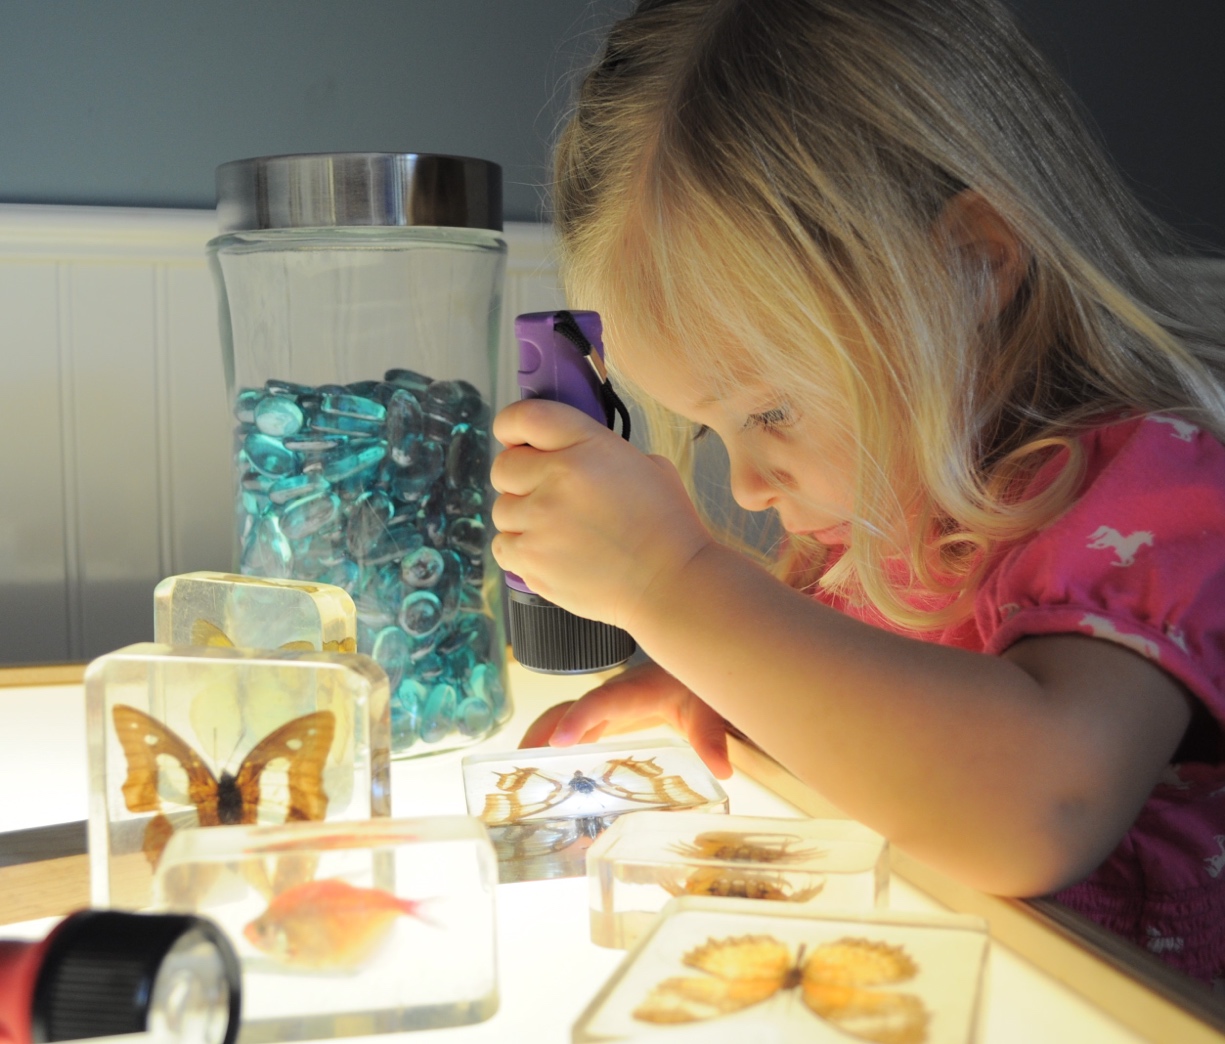 A young child looking at butterflies in a glass jar

Description automatically generated